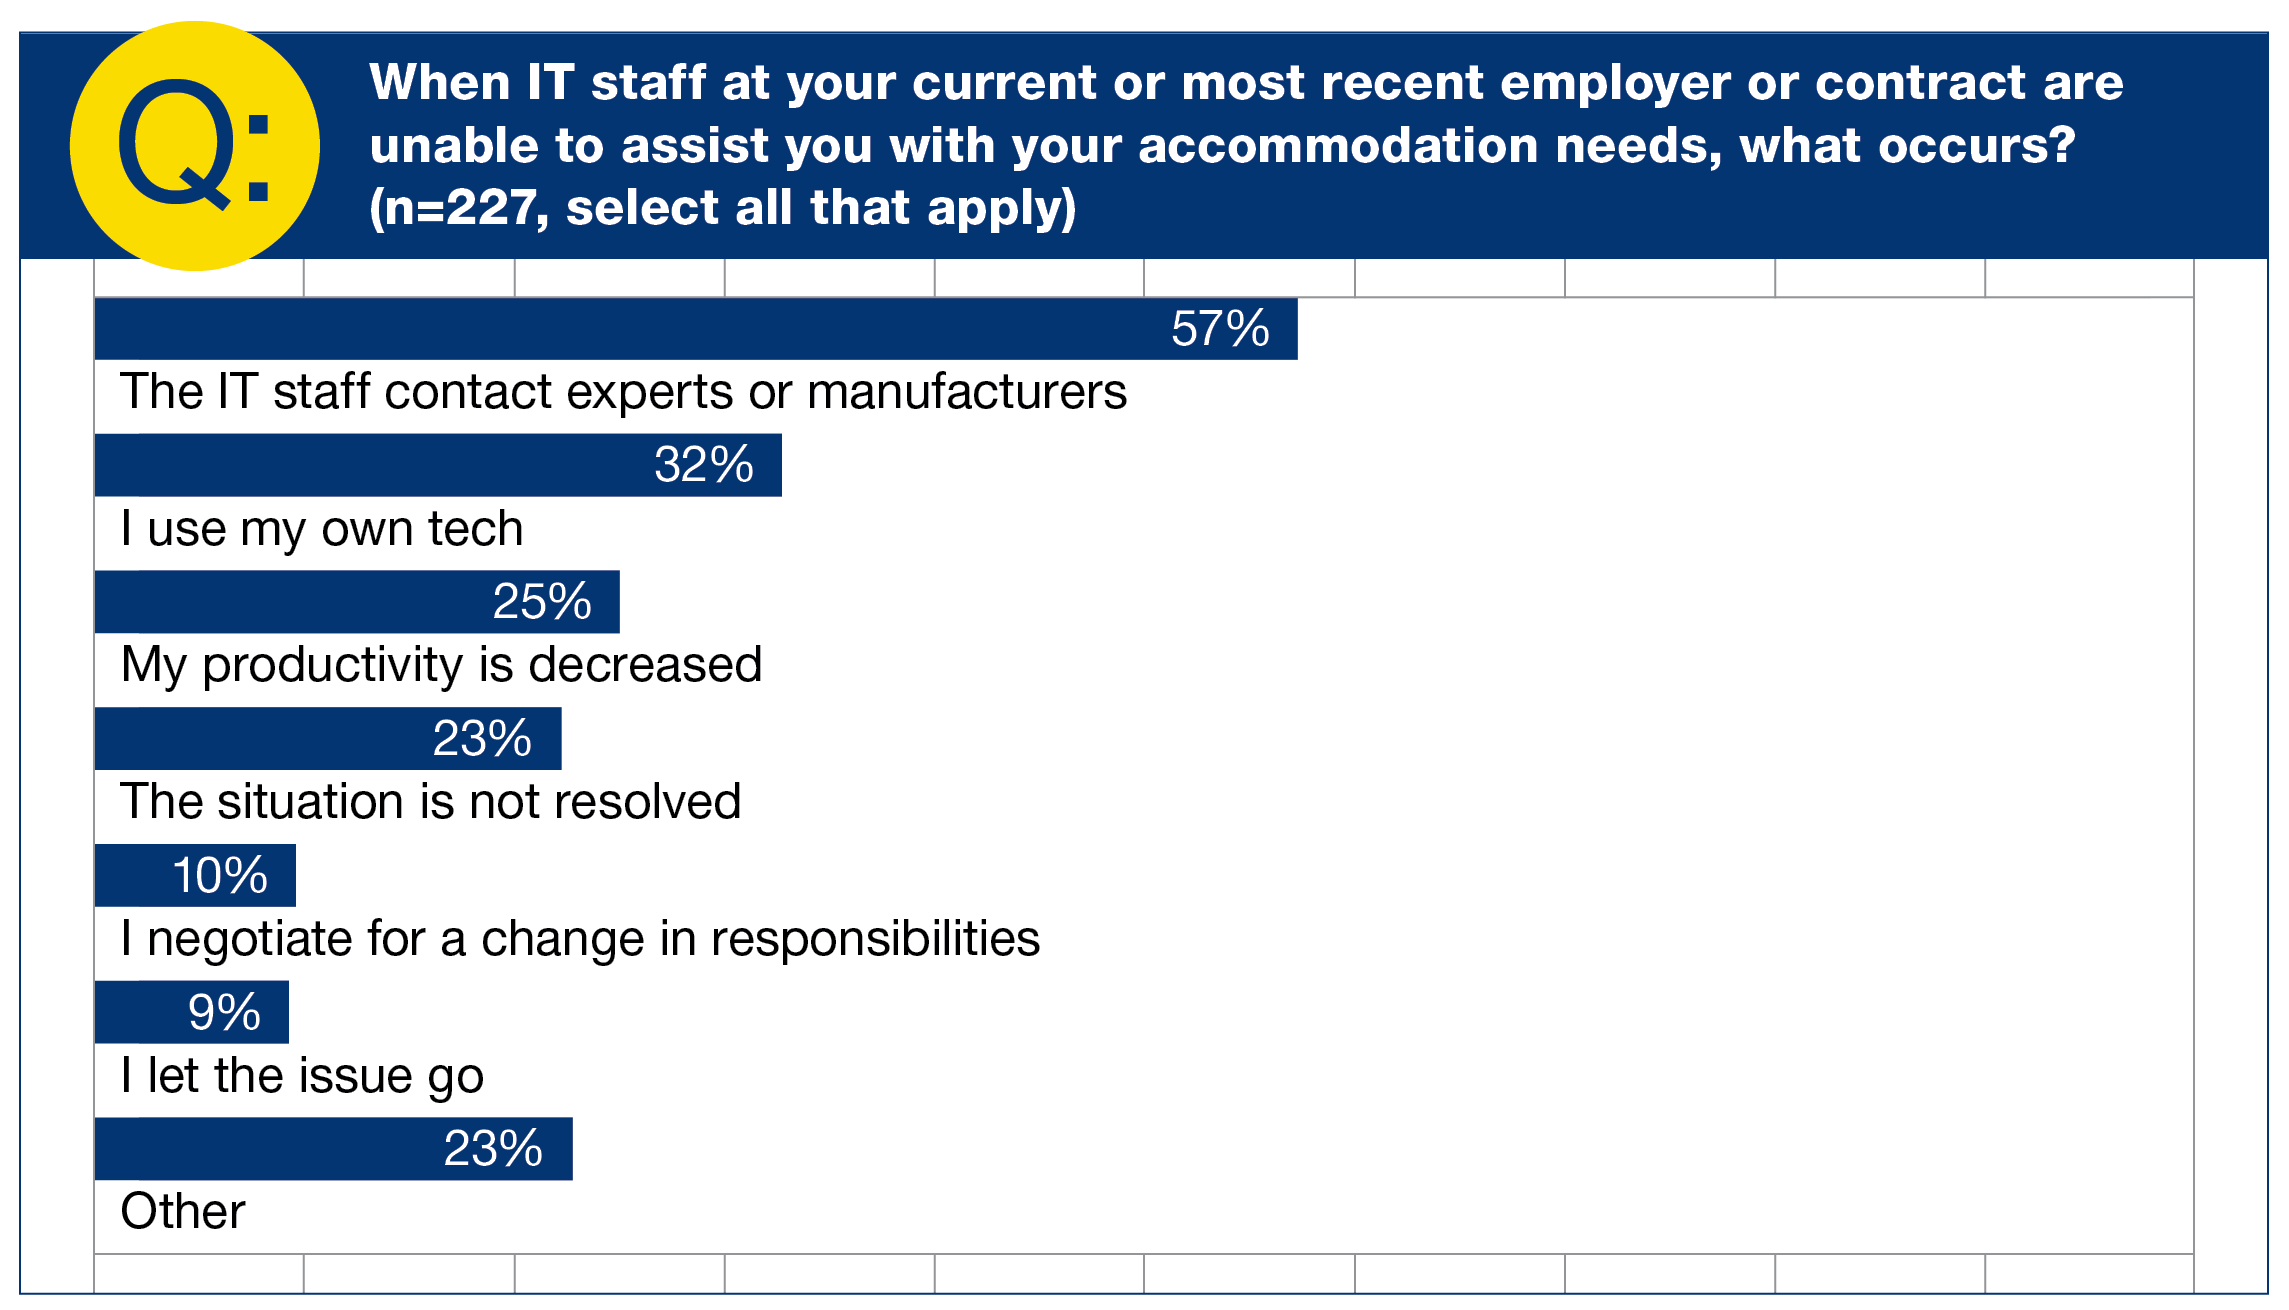 Chart with the question “When IT staff at your current or most recent employer or contract are unable to assist you with your accommodation needs, what occurs? (n=227) Responses: the IT staff contact experts or manufacturers (n=57%), I use my own tech (n=32%), my productivity is decreased (n=25%), the situation is not resolved (n=23%), I negotiate for a change in responsibilities (n=10%), I let the issue go (n=9%), other (n=23%).